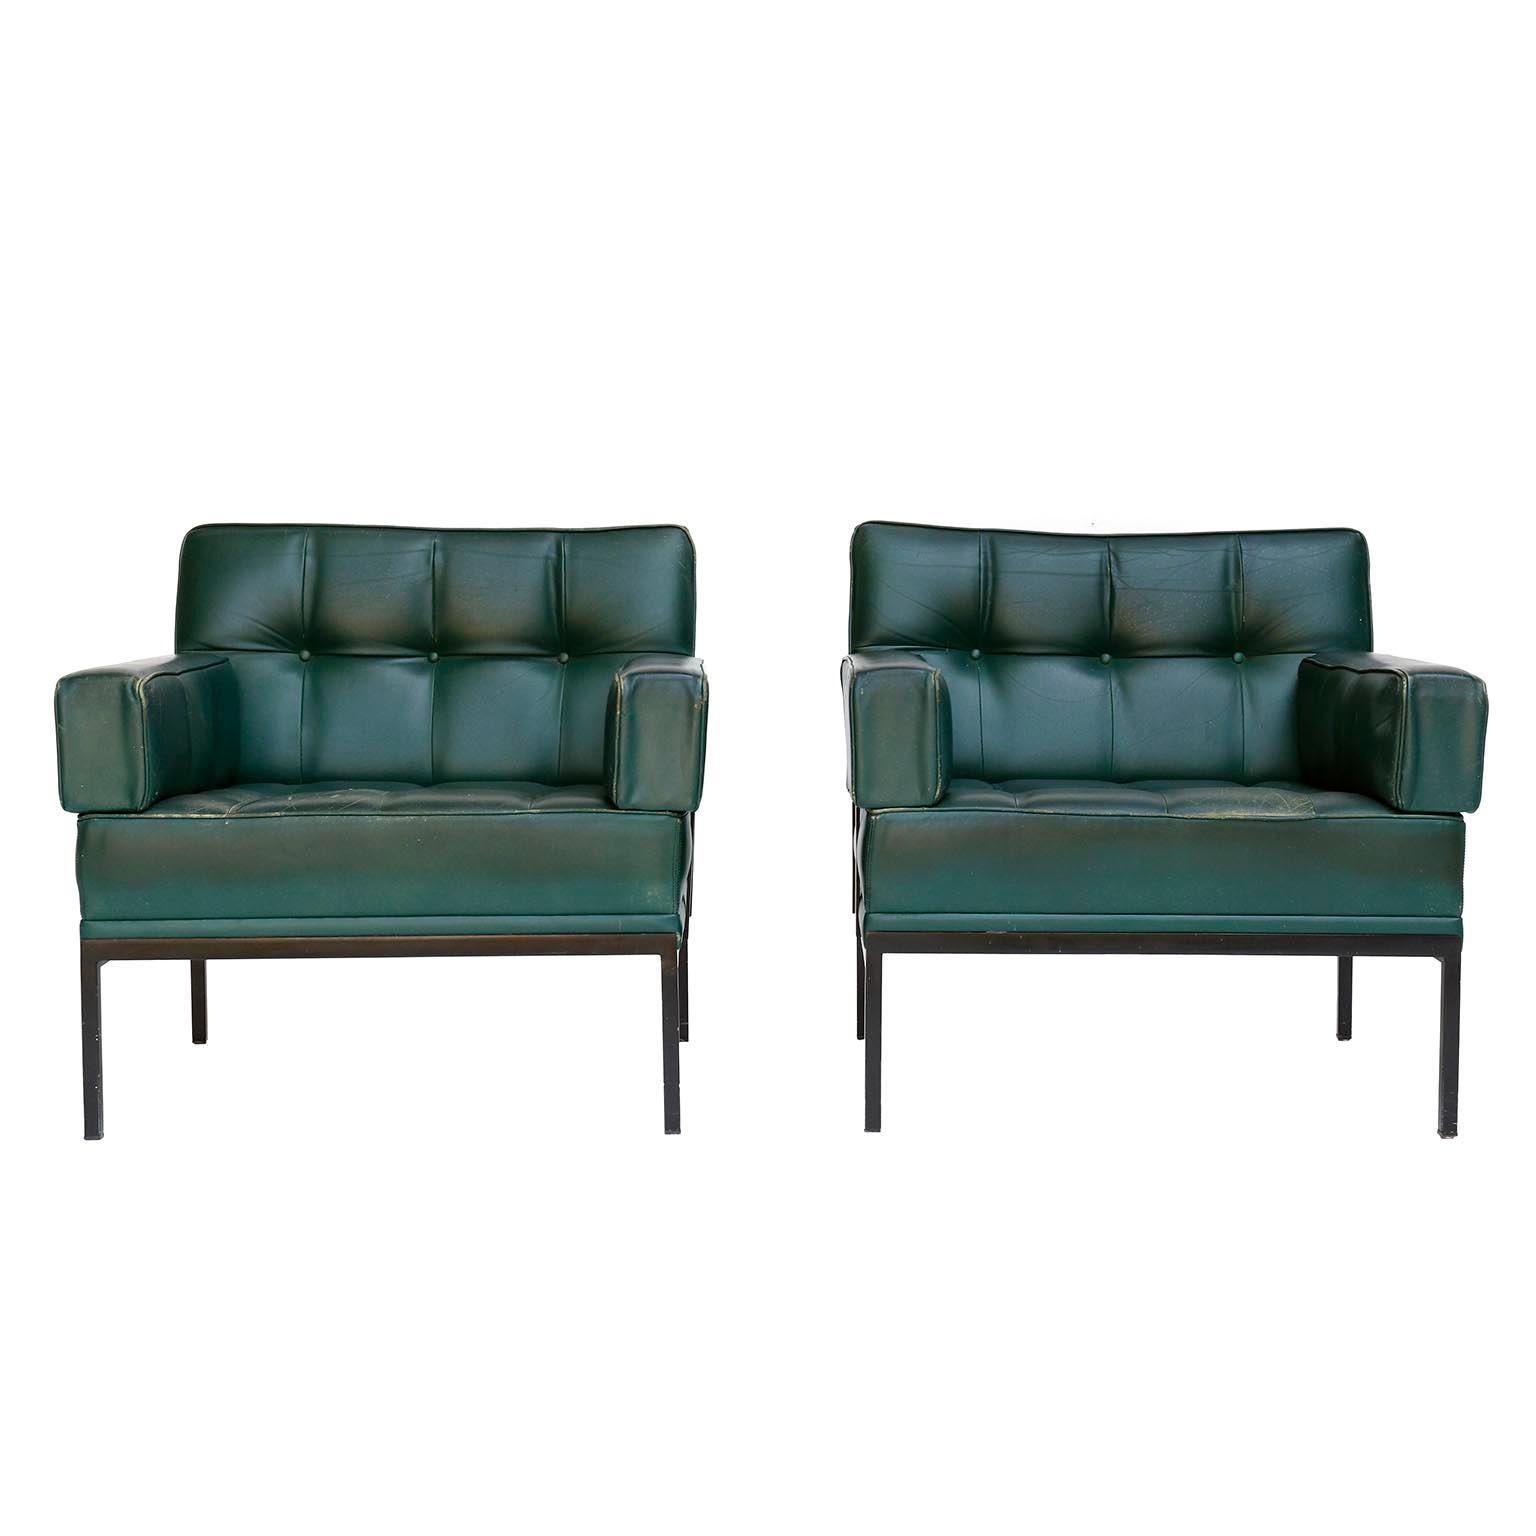 A pair of armchairs from the 'Constanze' (engl. Constance) series designed by Prof. Johannes Spalt for Wittmann, Austria, manufactured in midcentury, circa 1960.
Johannes Spalt designed the 'Constanze' series which includes sofas, chairs, and tables